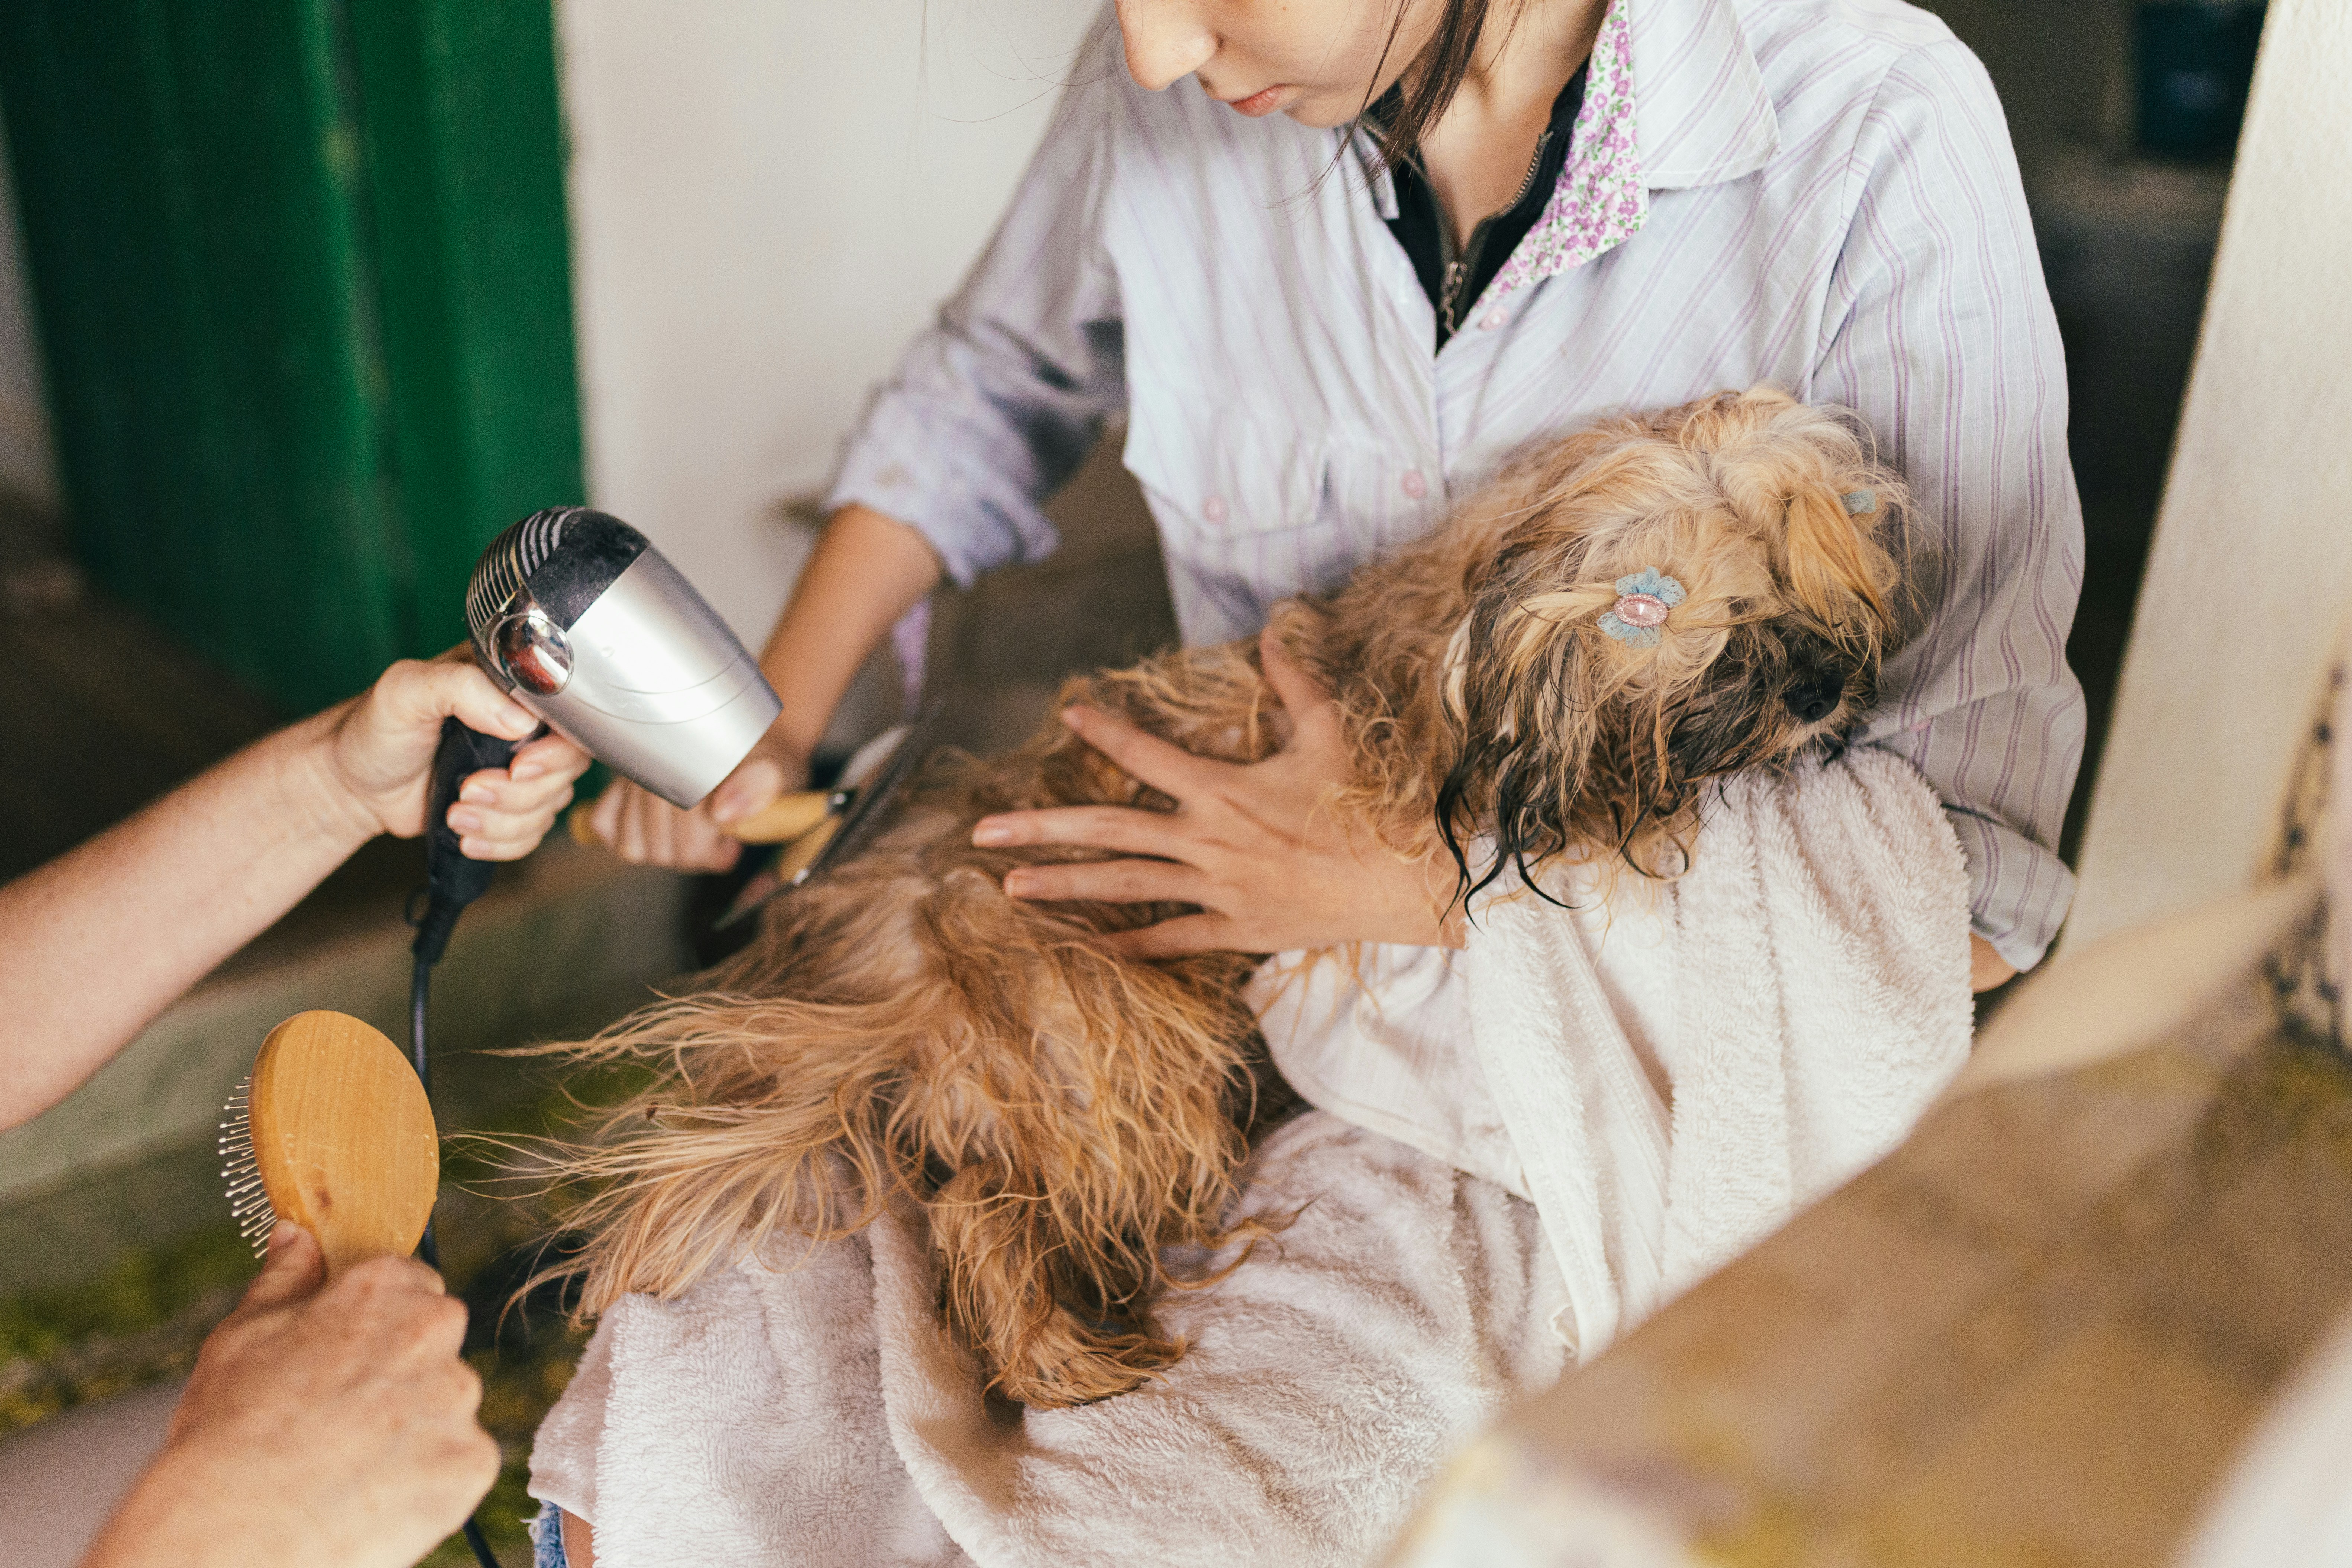 Why Do Dogs Act Strange After Grooming?